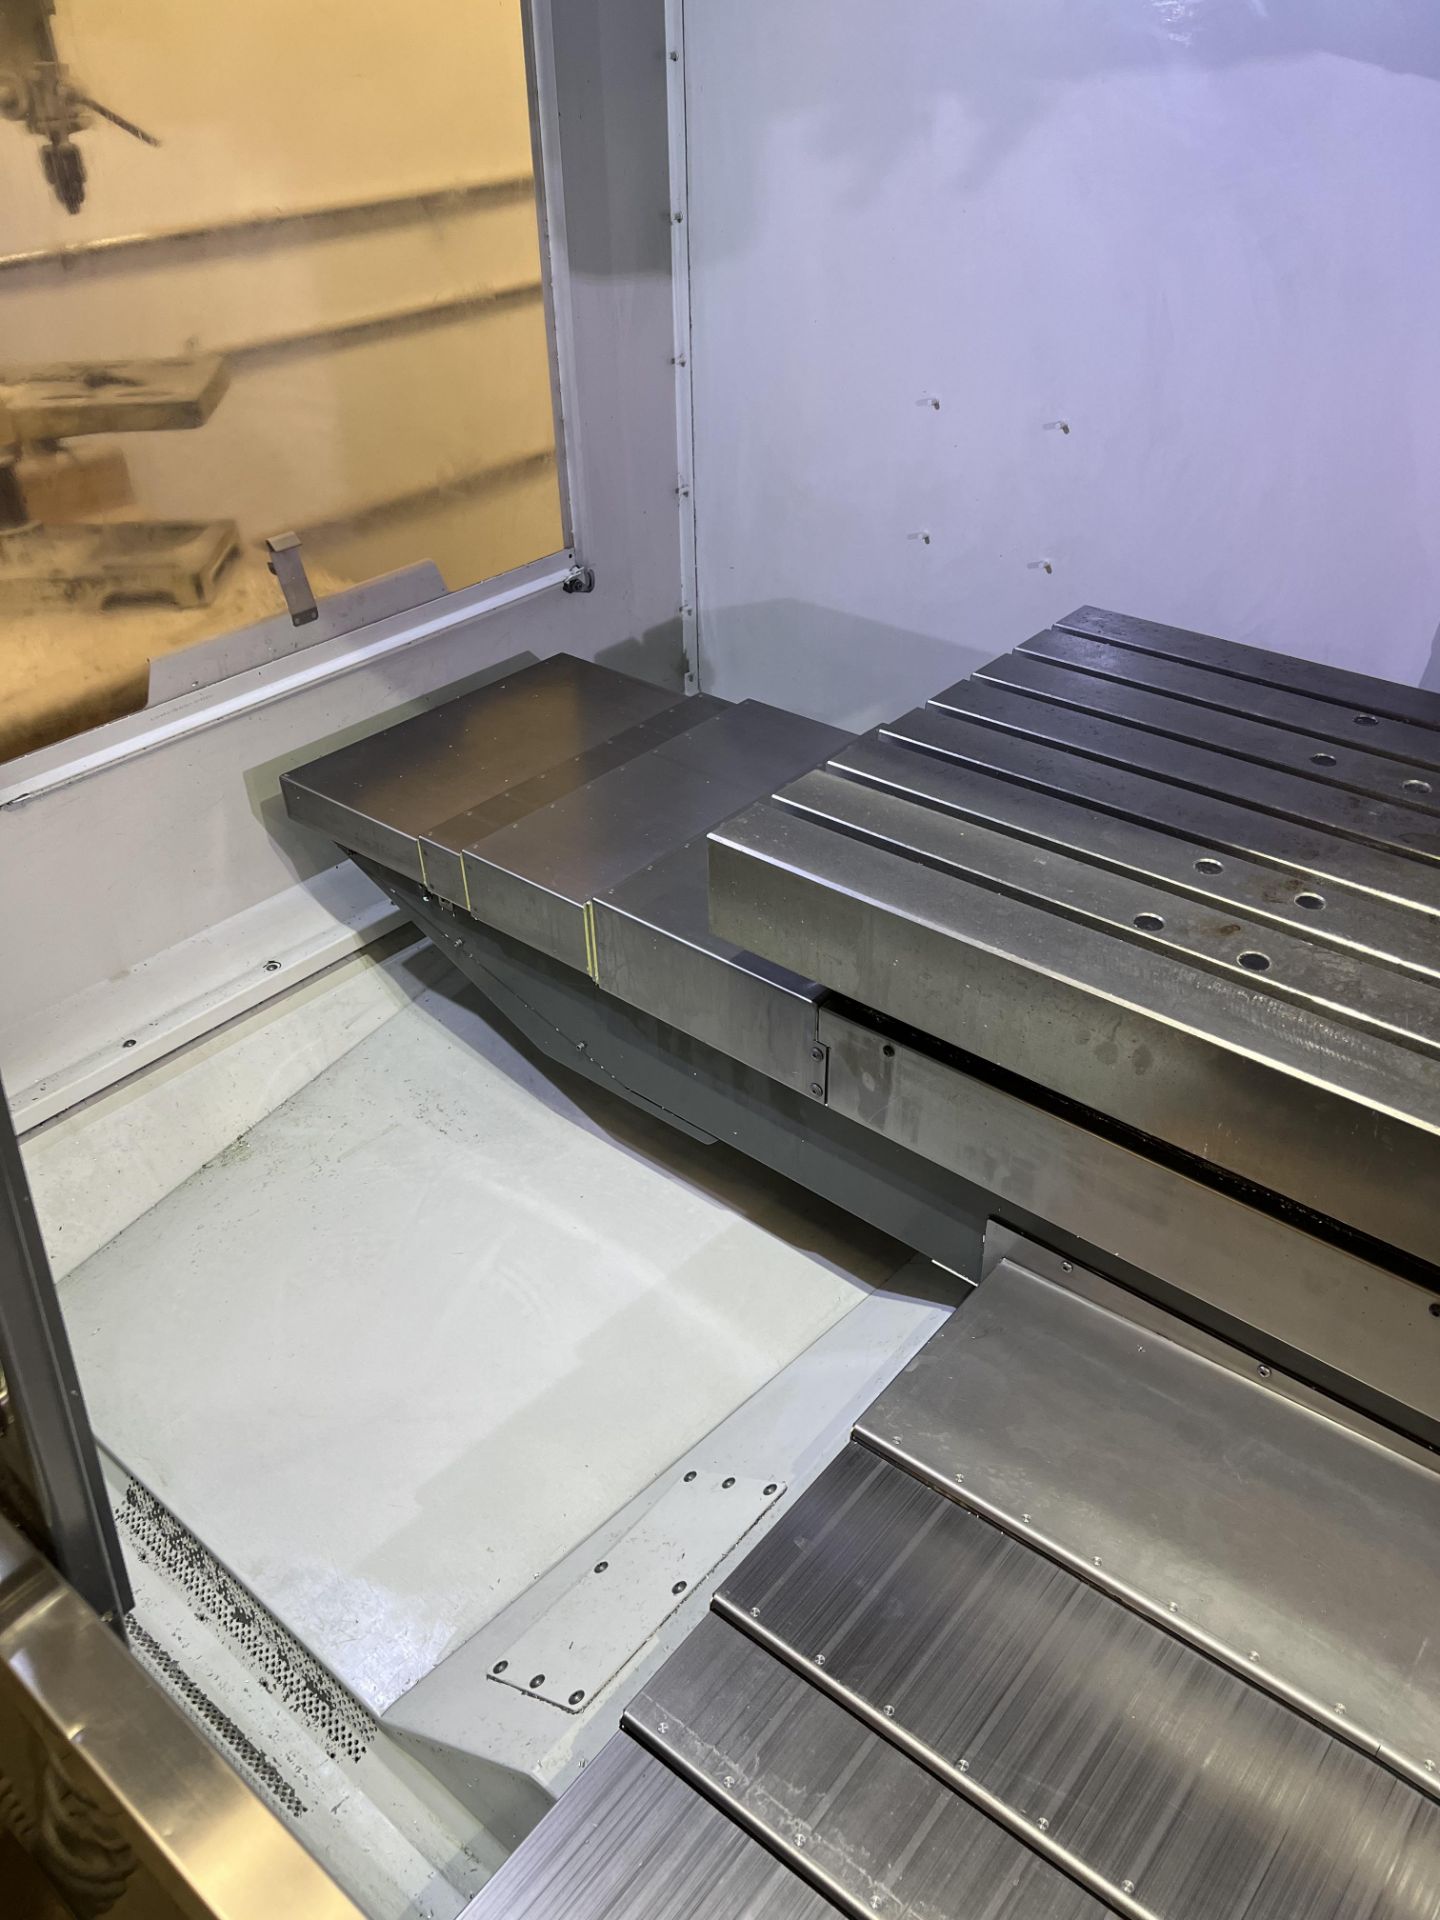 2018 HAAS VF-3YT VERTICAL MACHINING CENTER,POWER ON TIME HOURS IS LESS THAN 740! - Image 6 of 31